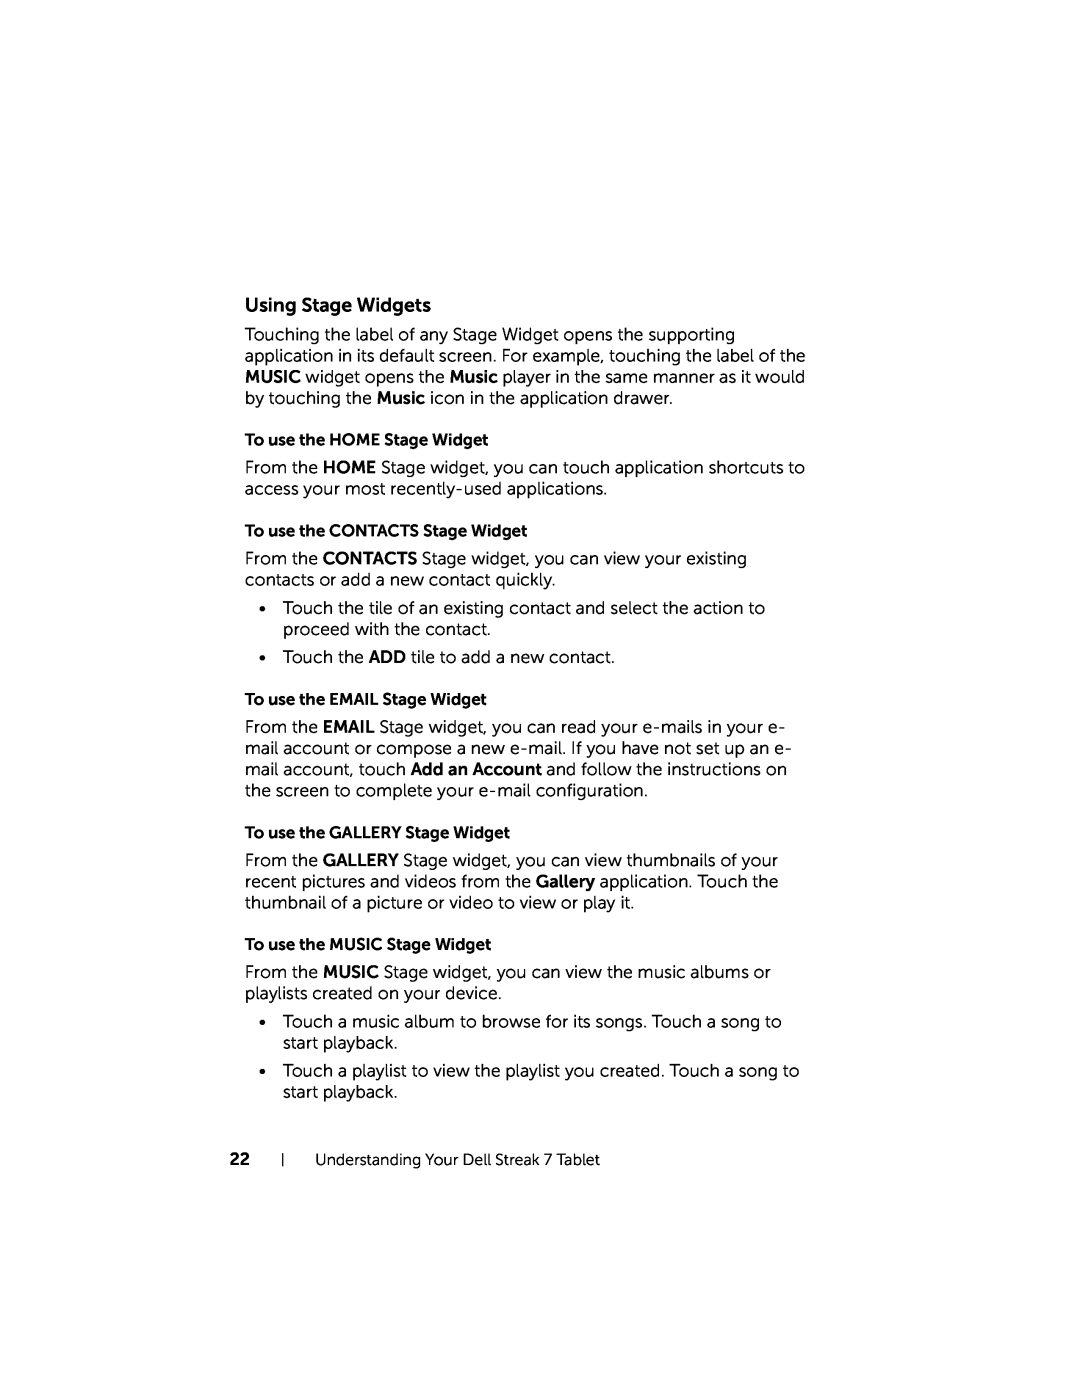 Dell 7 user manual Using Stage Widgets 